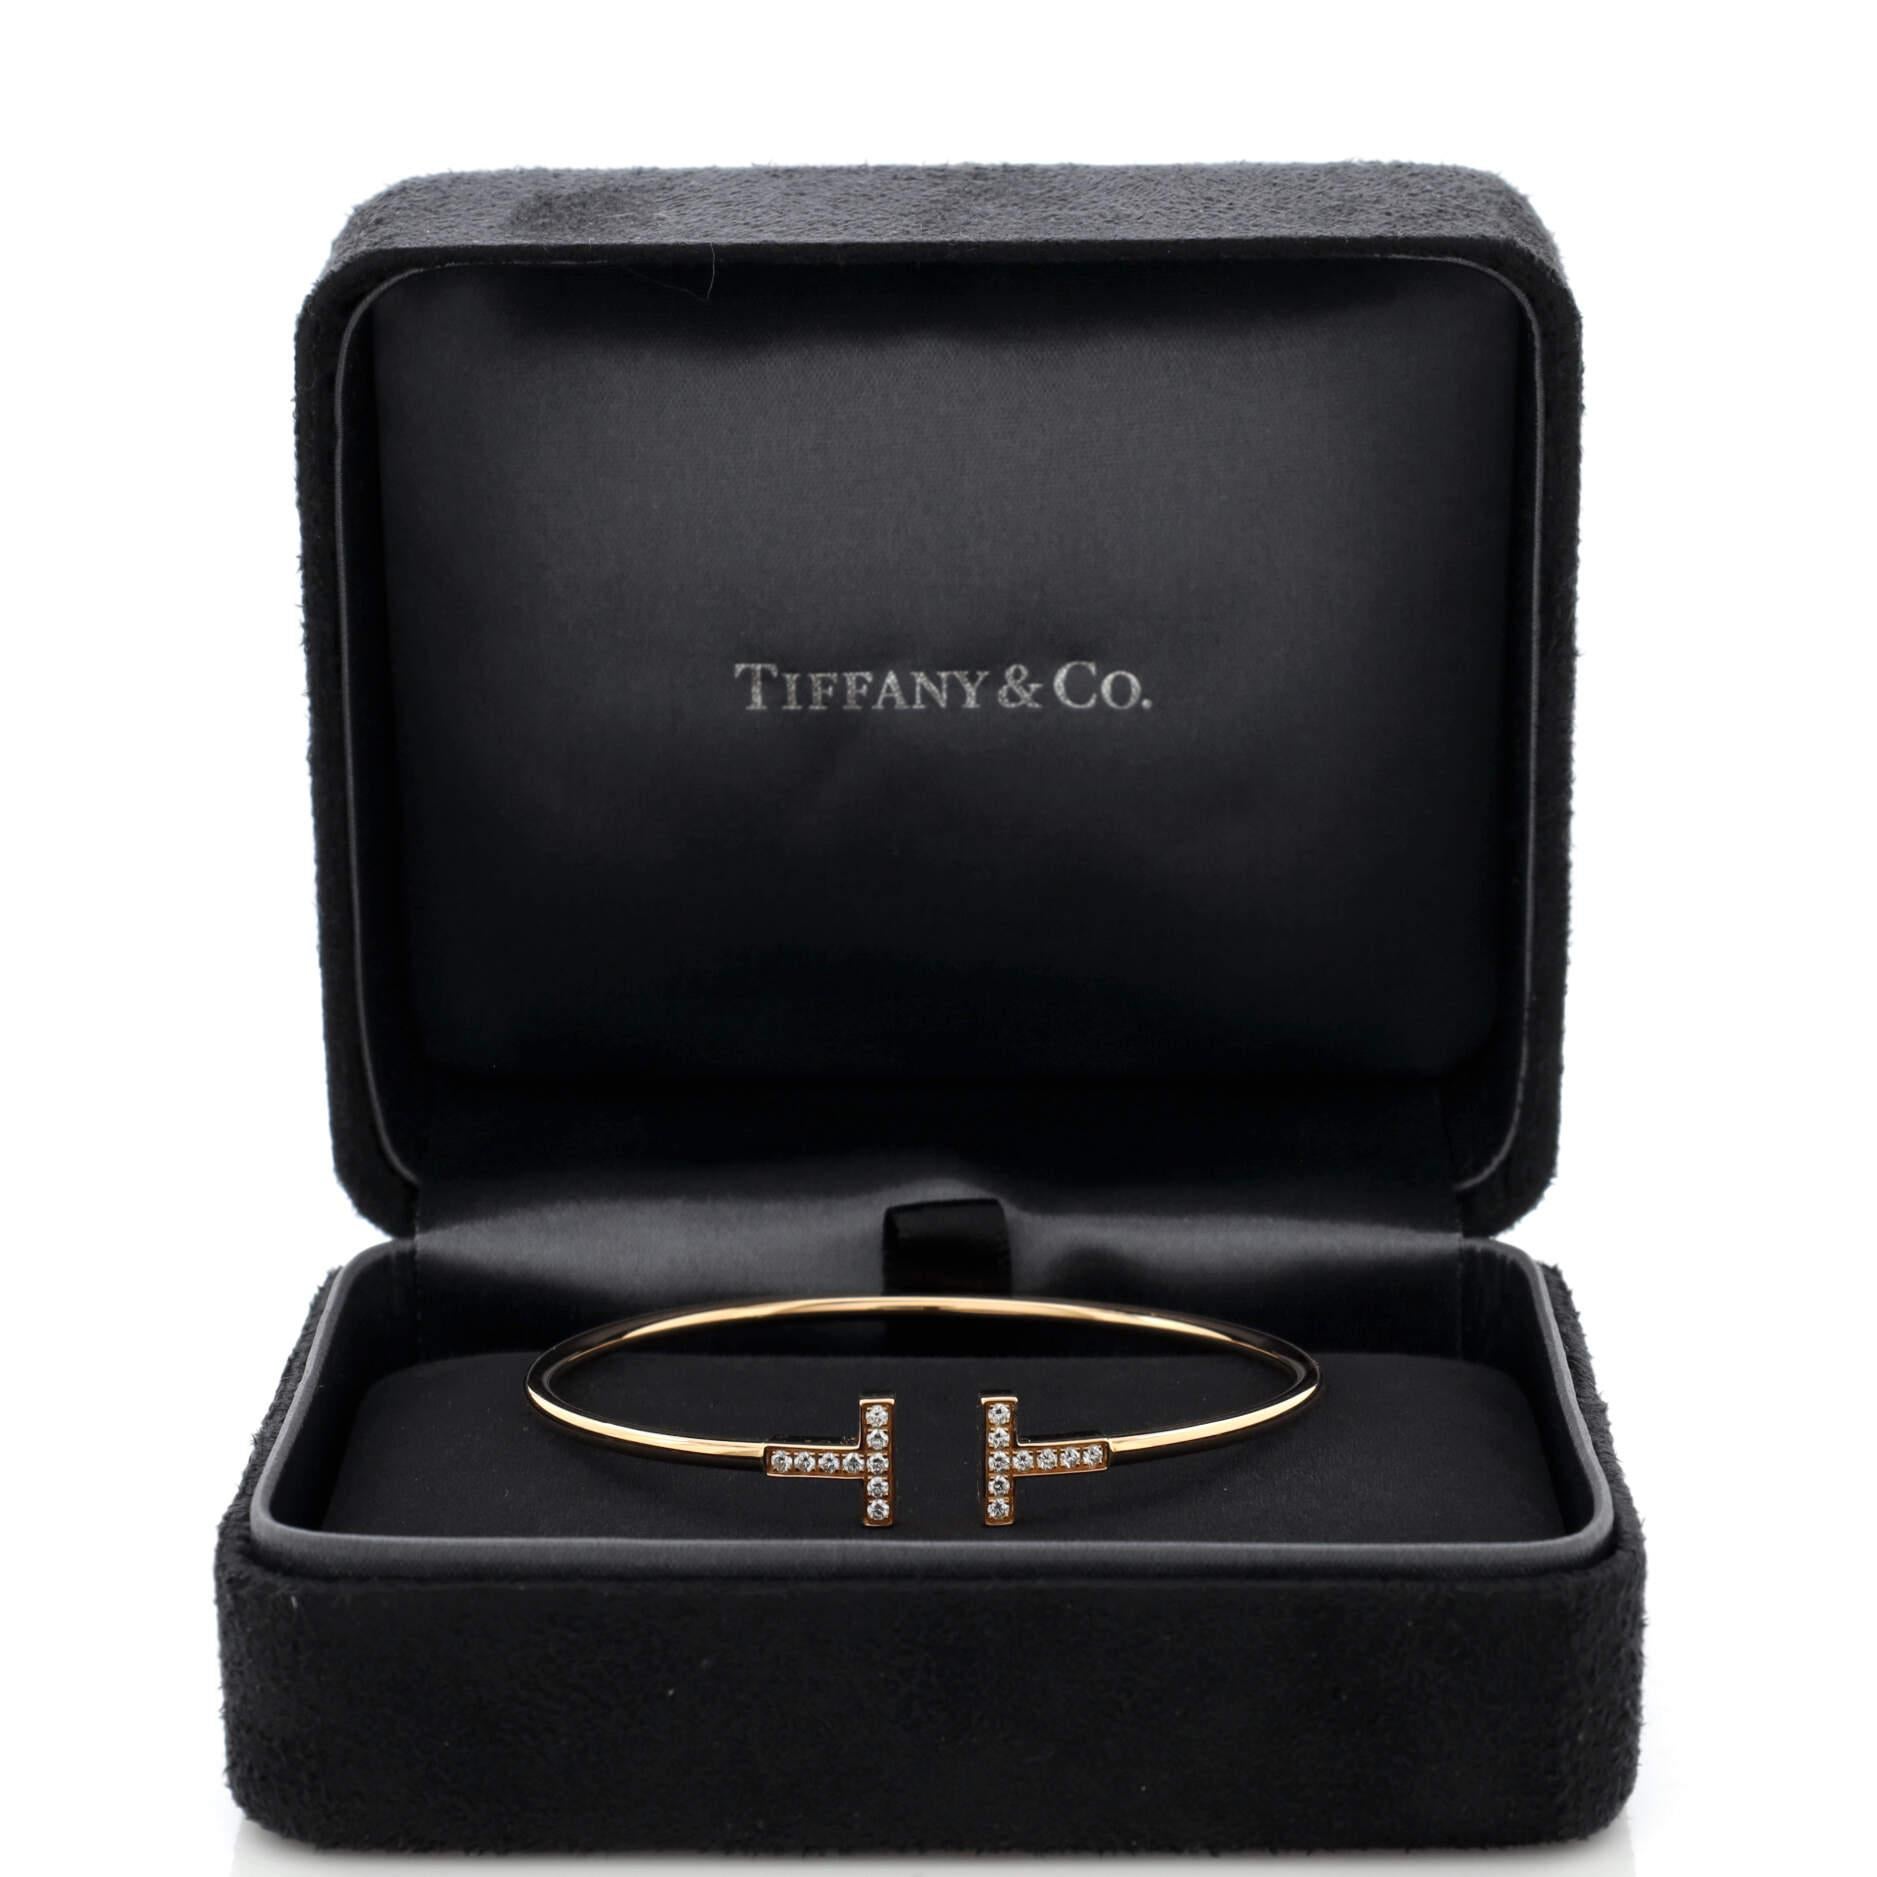 Condition: Great. Minor wear throughout.
Accessories:
Measurements: Circumference: 6.50 mm, Width: 2.45 mm
Designer: Tiffany & Co.
Model: T Wire Bracelet 18K Rose Gold with Diamonds
Exterior Color: Yellow Gold
Item Number: 221070/46